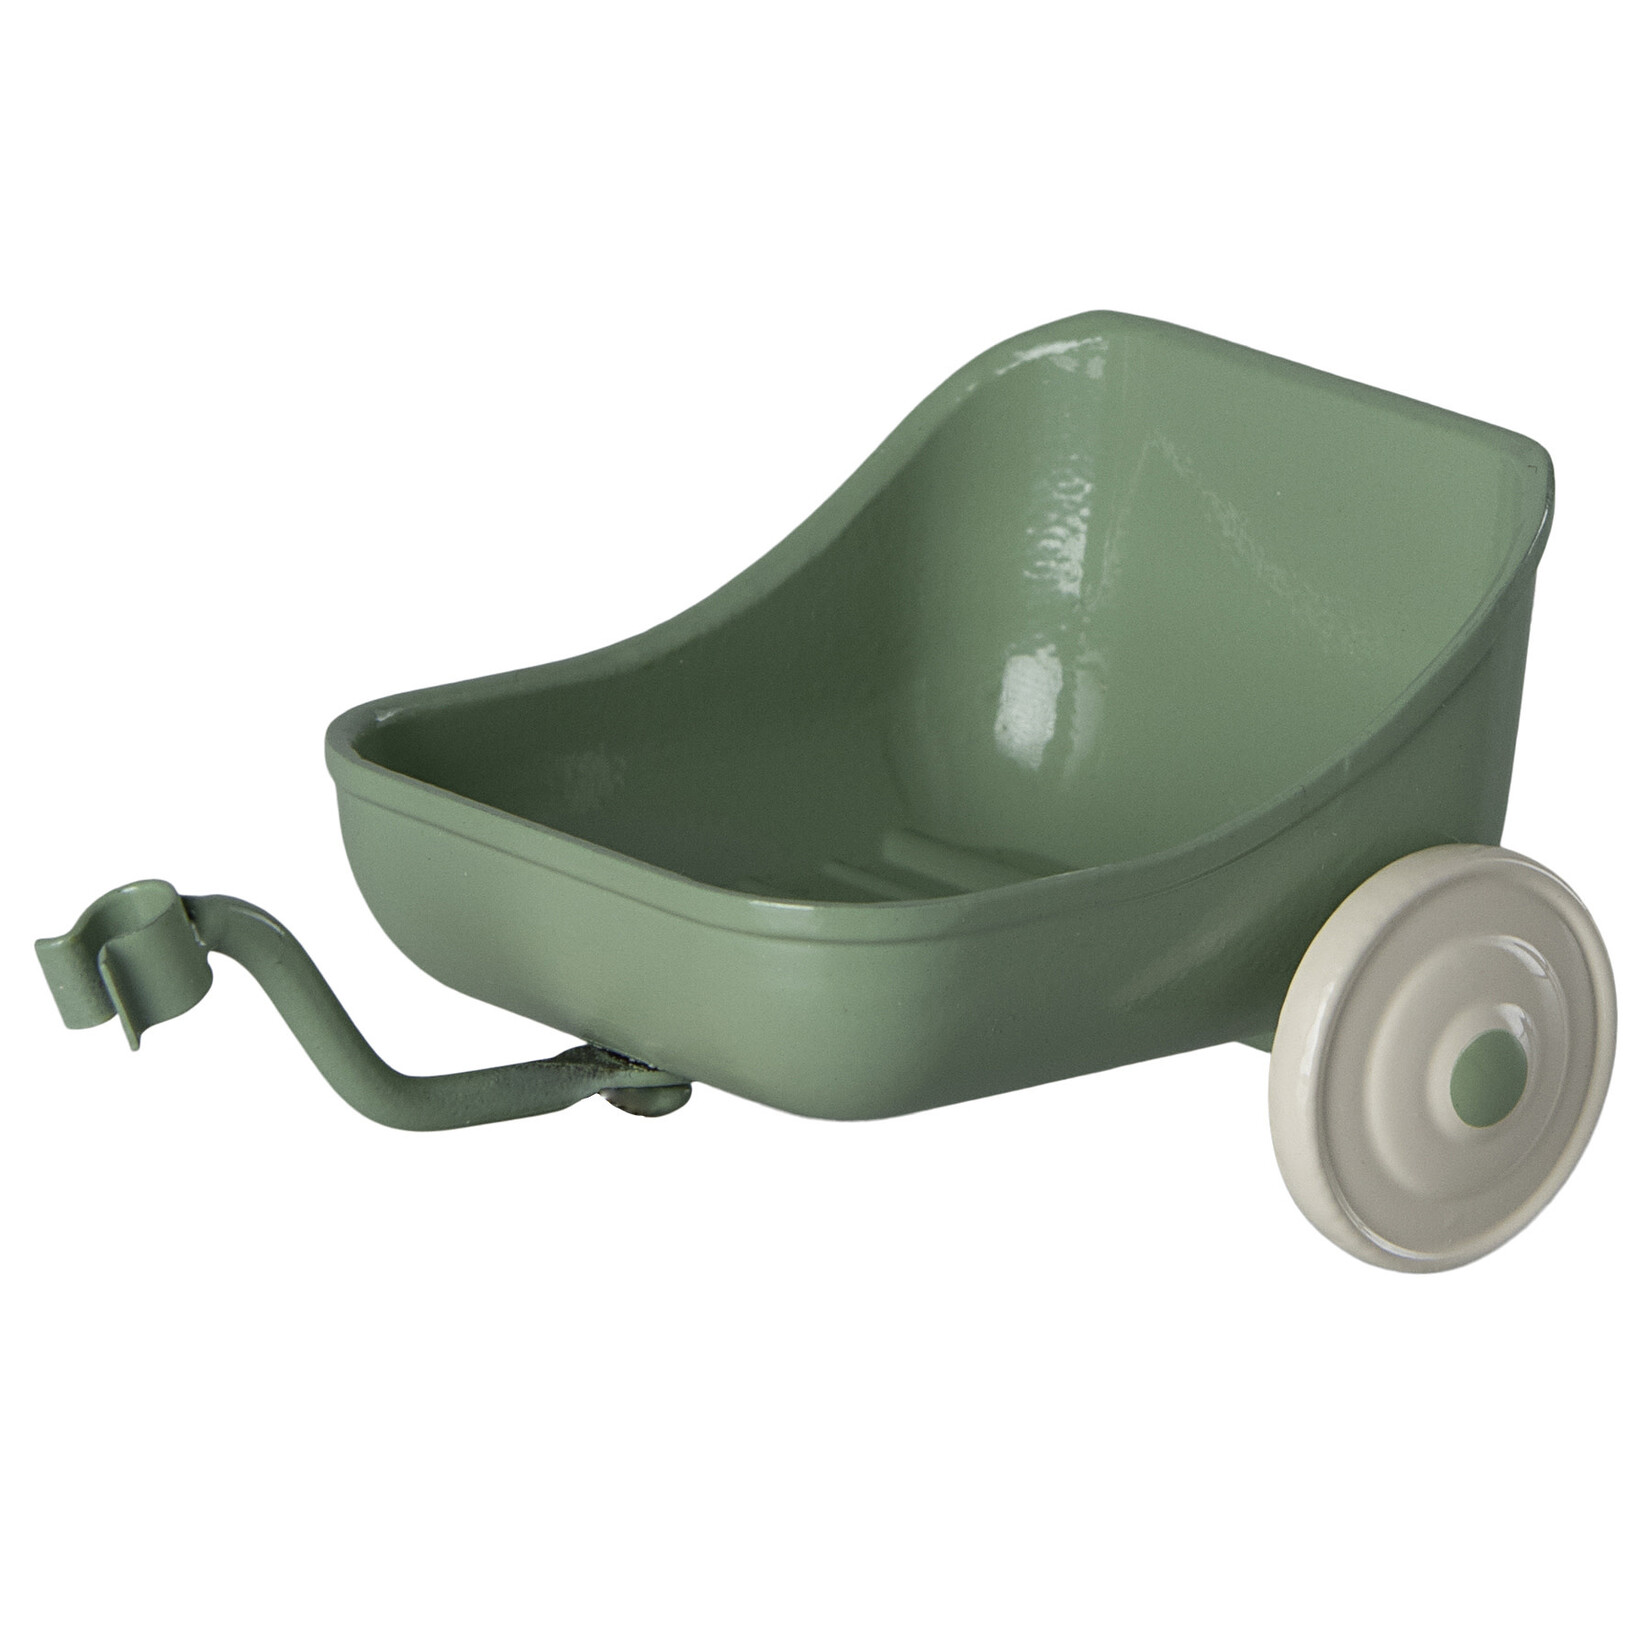 Maileg Maileg Tricycle hanger Green Trailer add on for Mouse